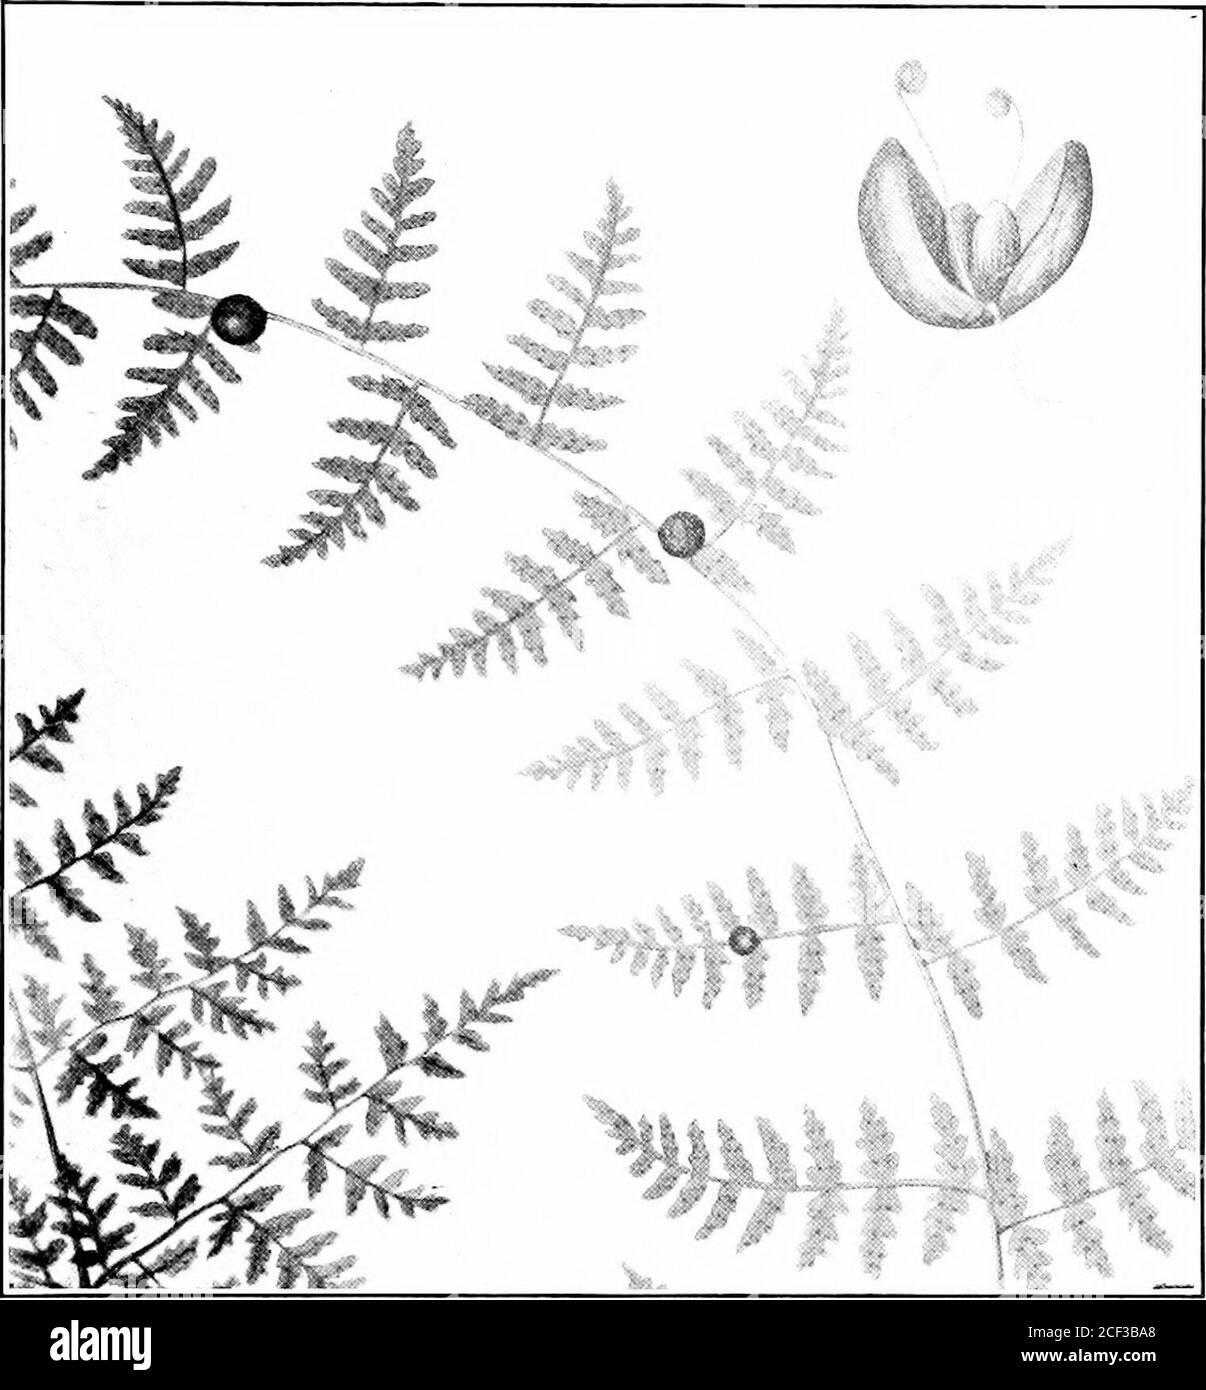 . The fern lover's companion; a guide for the Northeastern States and Canada. Biilblet Bladder Fern. Cystopteris hiiWifera(Willoughby, Vt., 190-1, G. H. TJ The Ferx Lovers Cojipaxion 153. Bulblct Bladdor Fern, di/sfoplcri.t Imlbifcra 154 The Fern Lovers Compaxiox One of the most graceful and attractive of our nativeferns; an object of beauty, whether standing alone ormassed with other growths. It is very easily cultivatedand one of the best for draping. We may drape ourhomes by the yard, says Woolson, with the most grace-ful and filmy of our common ferns, the bladder fern.This fern and the mai Stock Photo